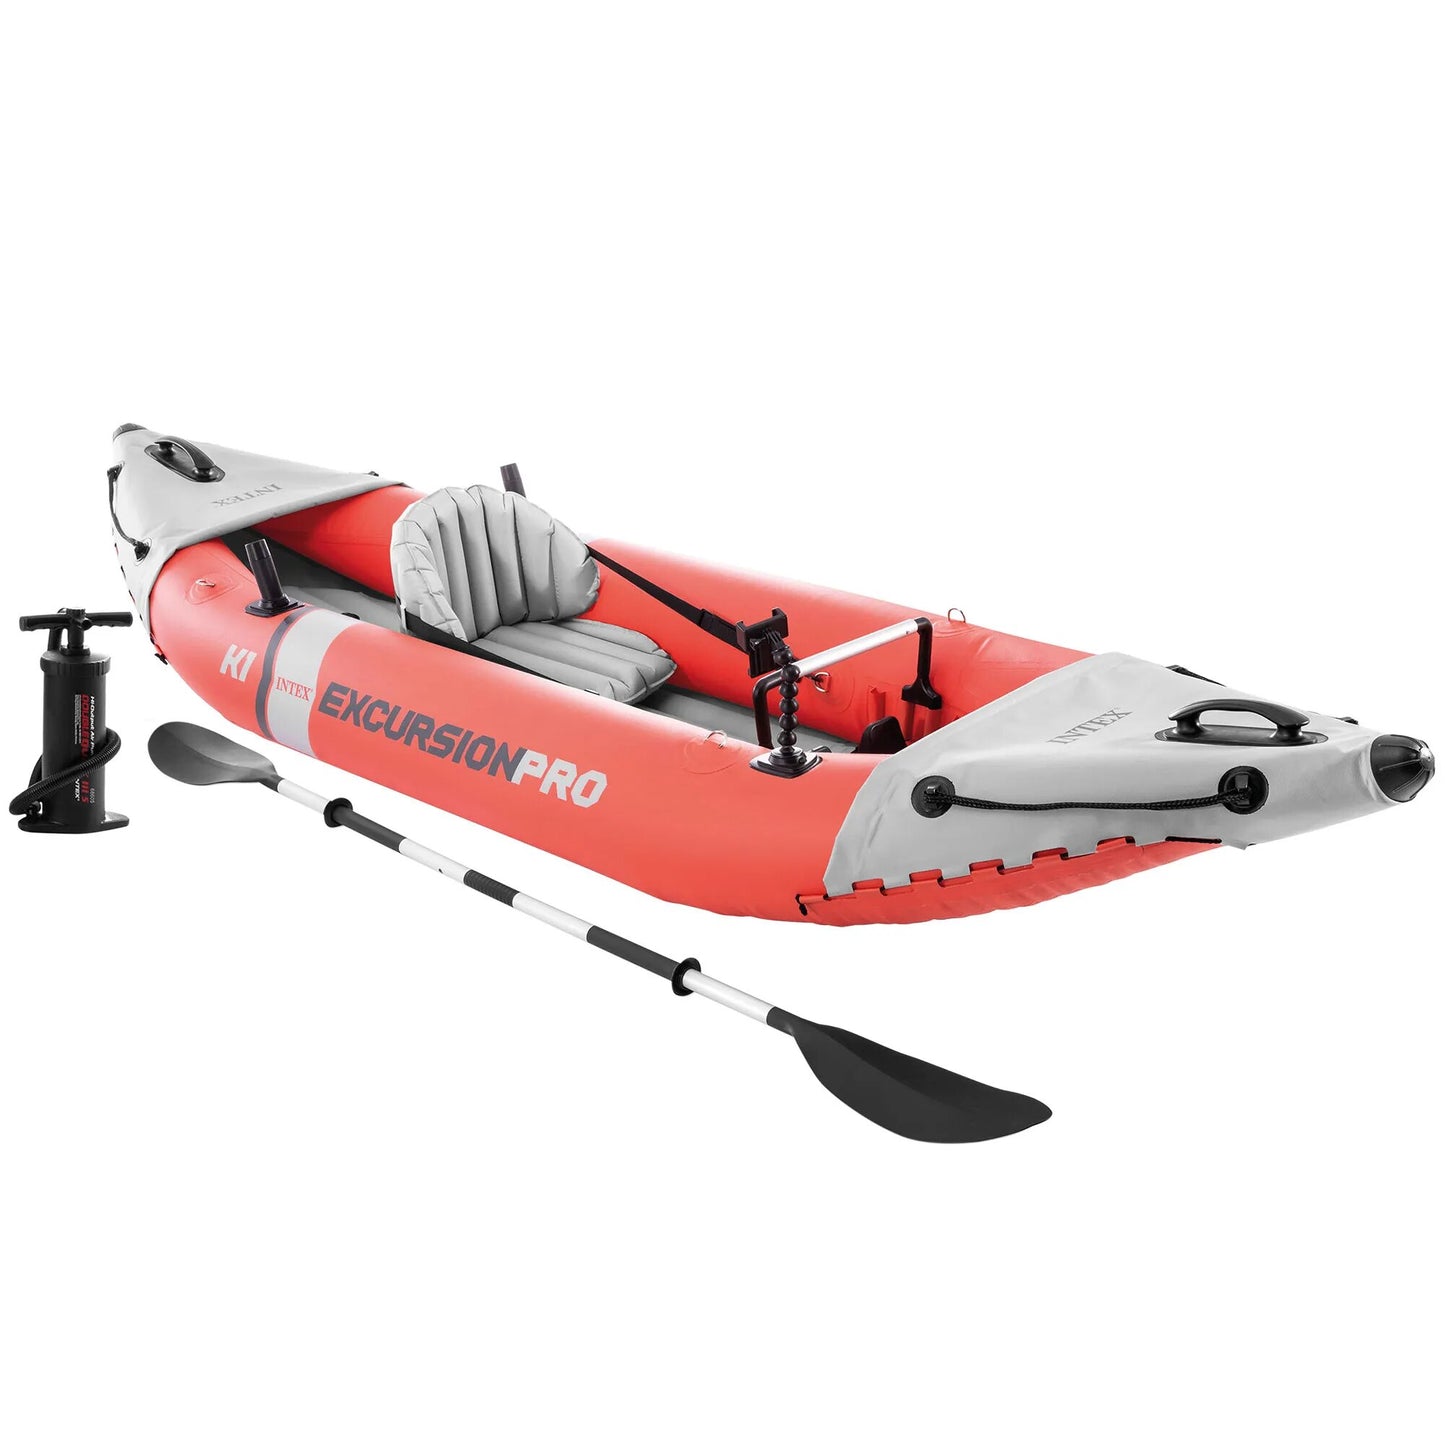 Inflatable Kayak INTEX K2 Excursion Pro oars + inflator, kayak accesso –  Laurin's Treasures